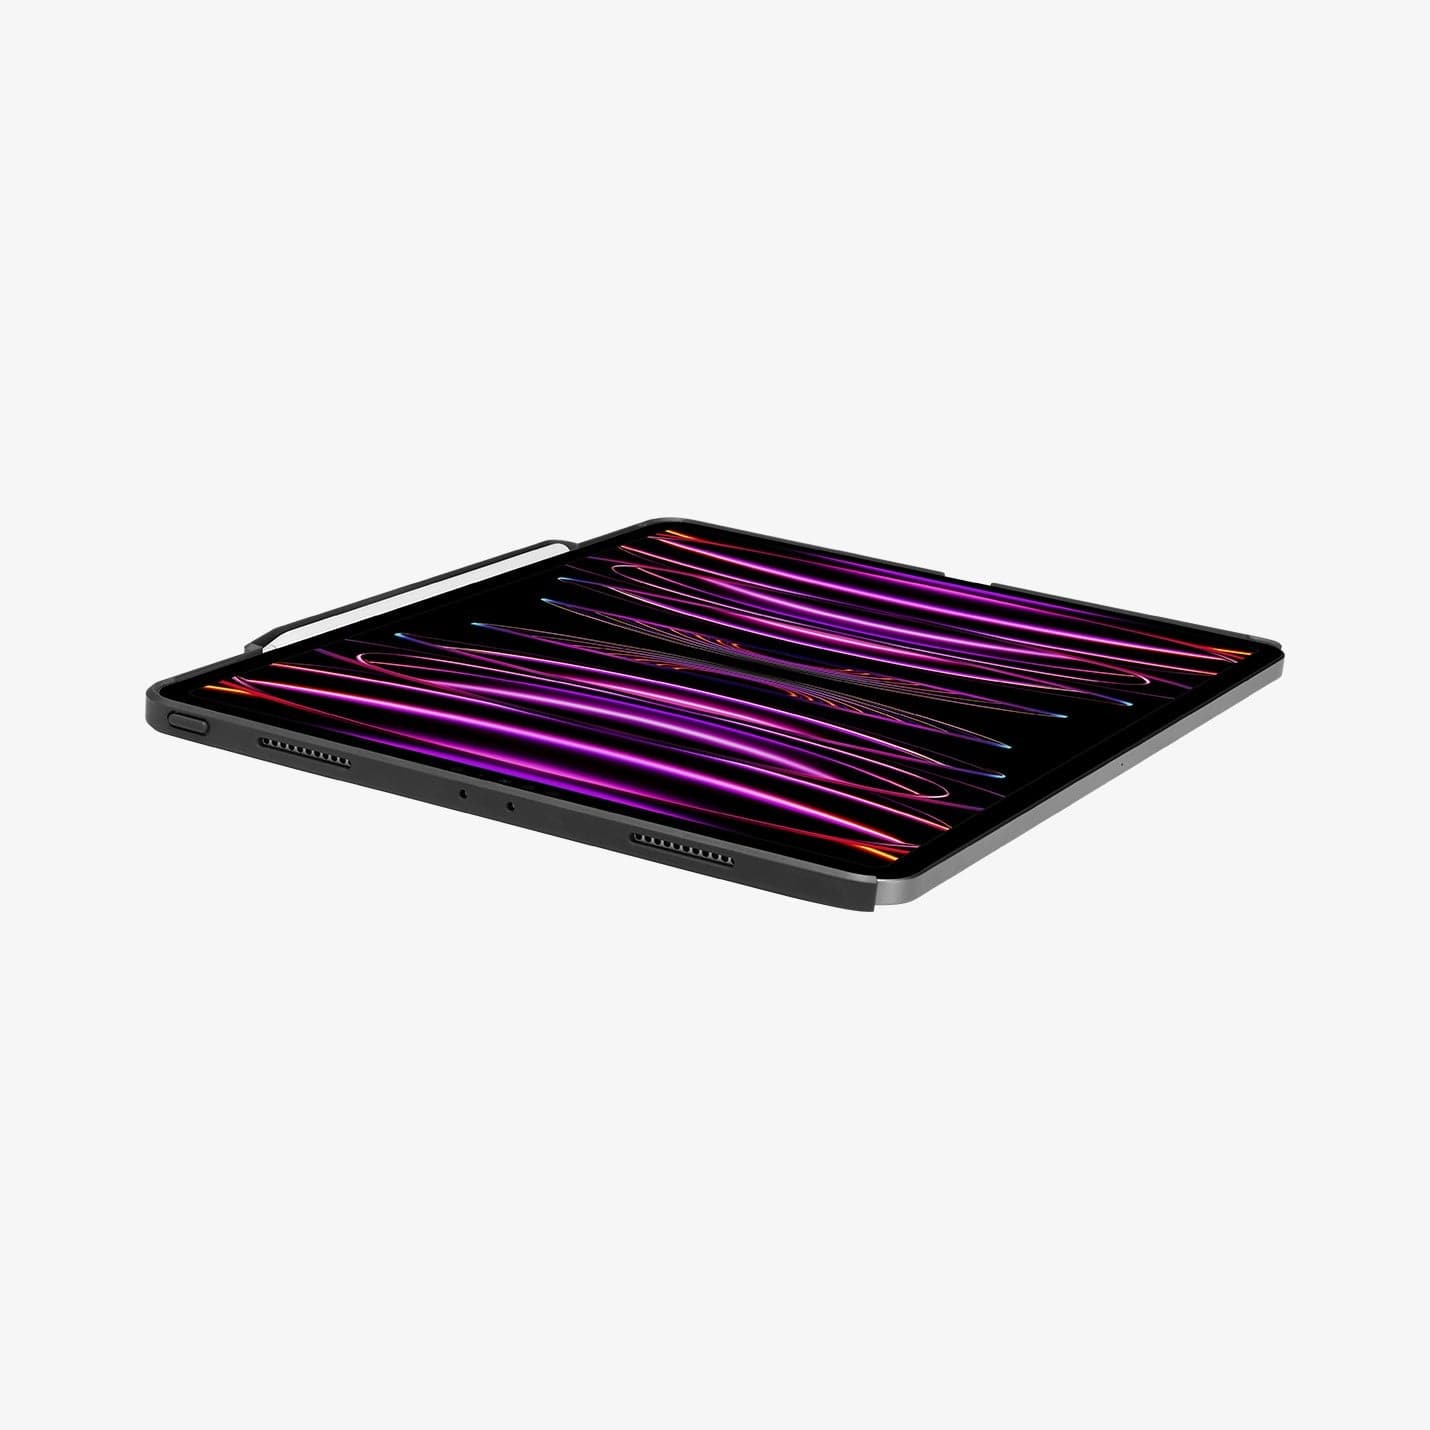 ACS05468 - iPad Pro 12.9" Case Thin Fit Pro in black showing the top, front and side